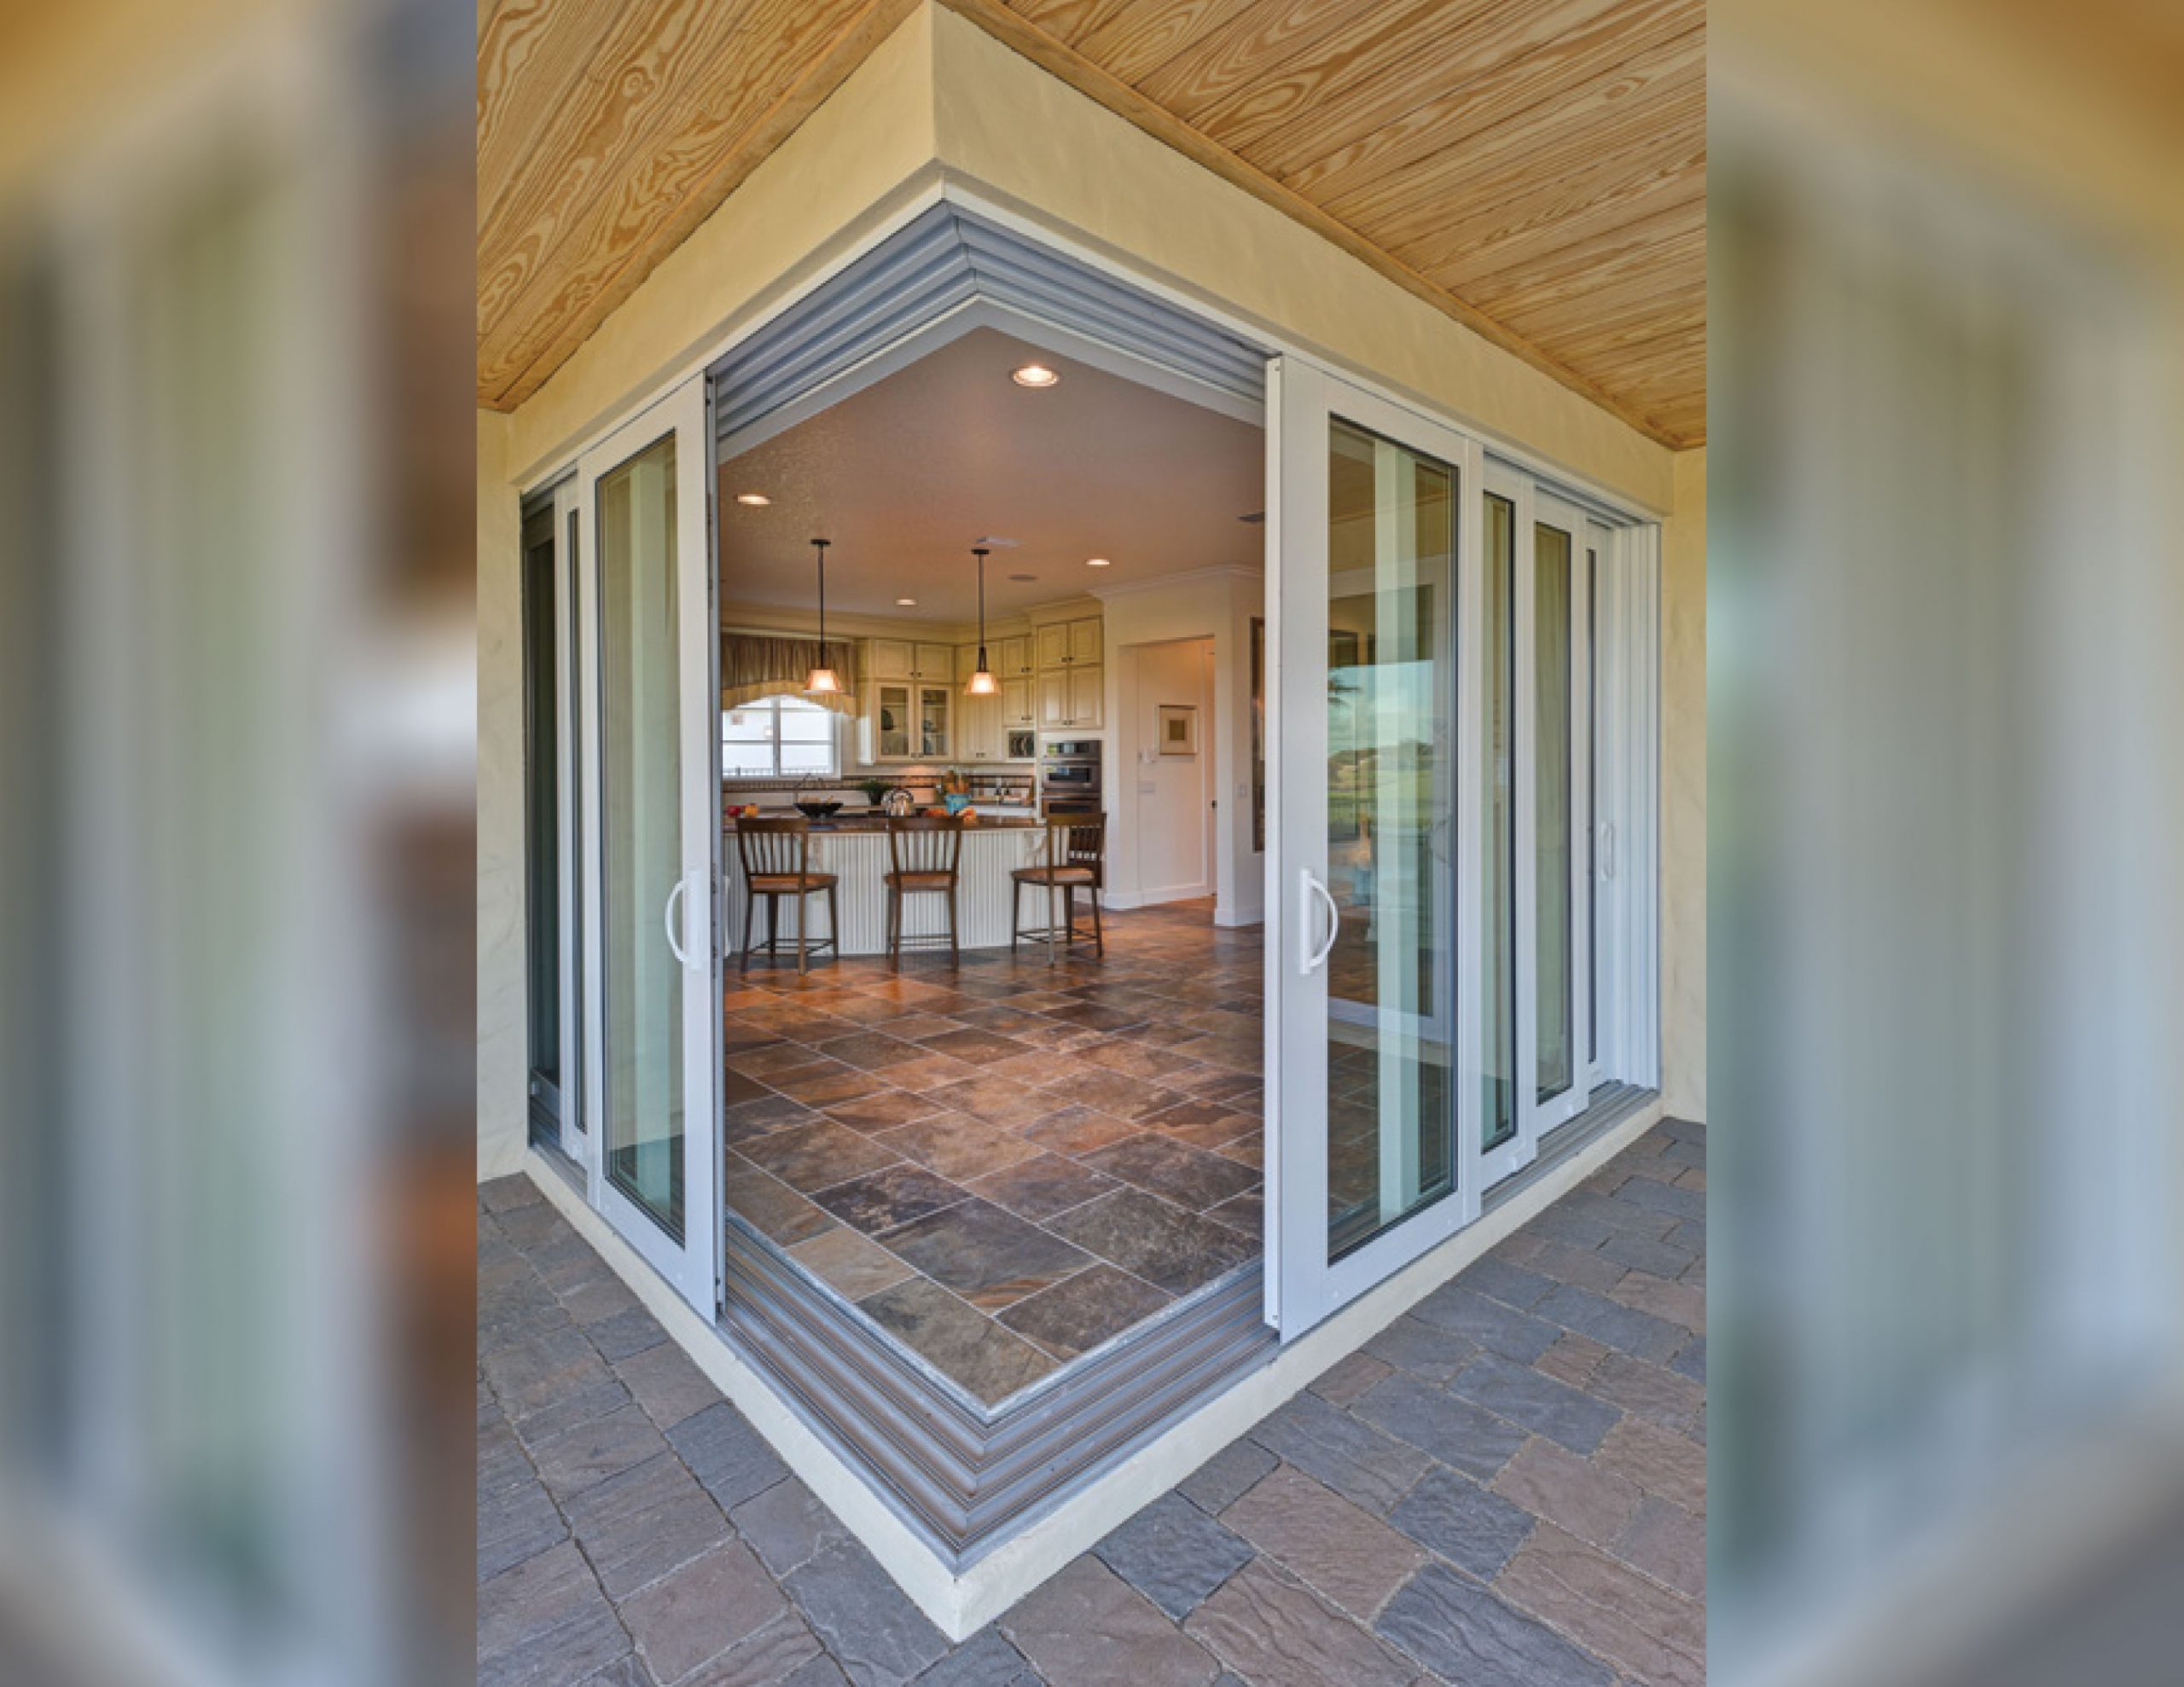 You are currently viewing The Ravishing Hurricane Impact Sliding Glass Doors